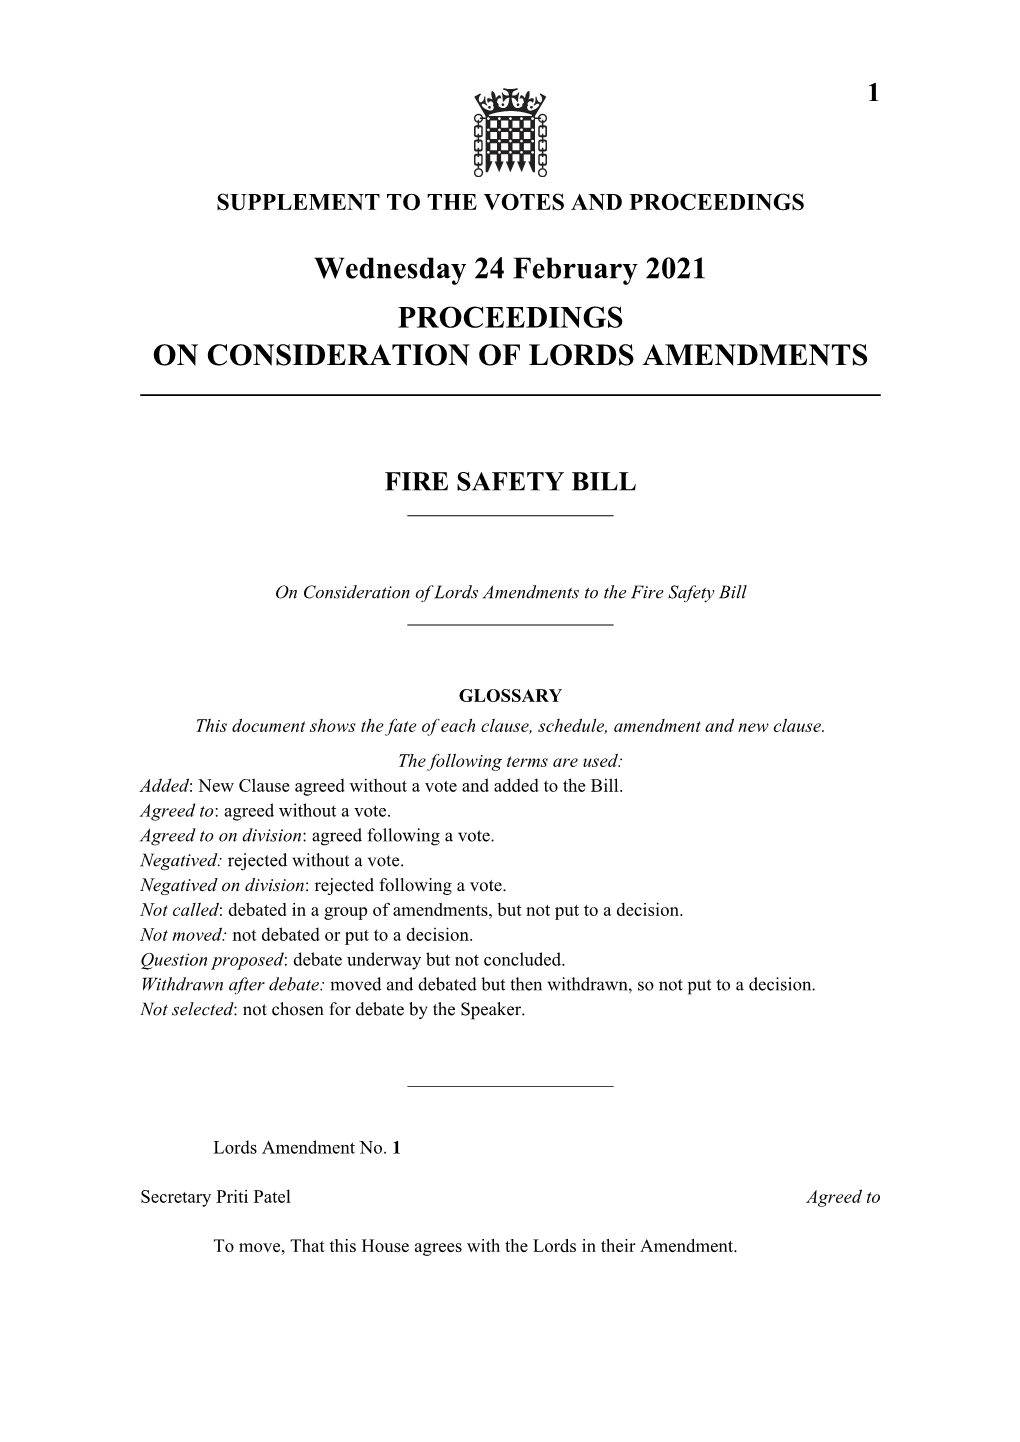 Wednesday 24 February 2021 PROCEEDINGS on CONSIDERATION of LORDS AMENDMENTS